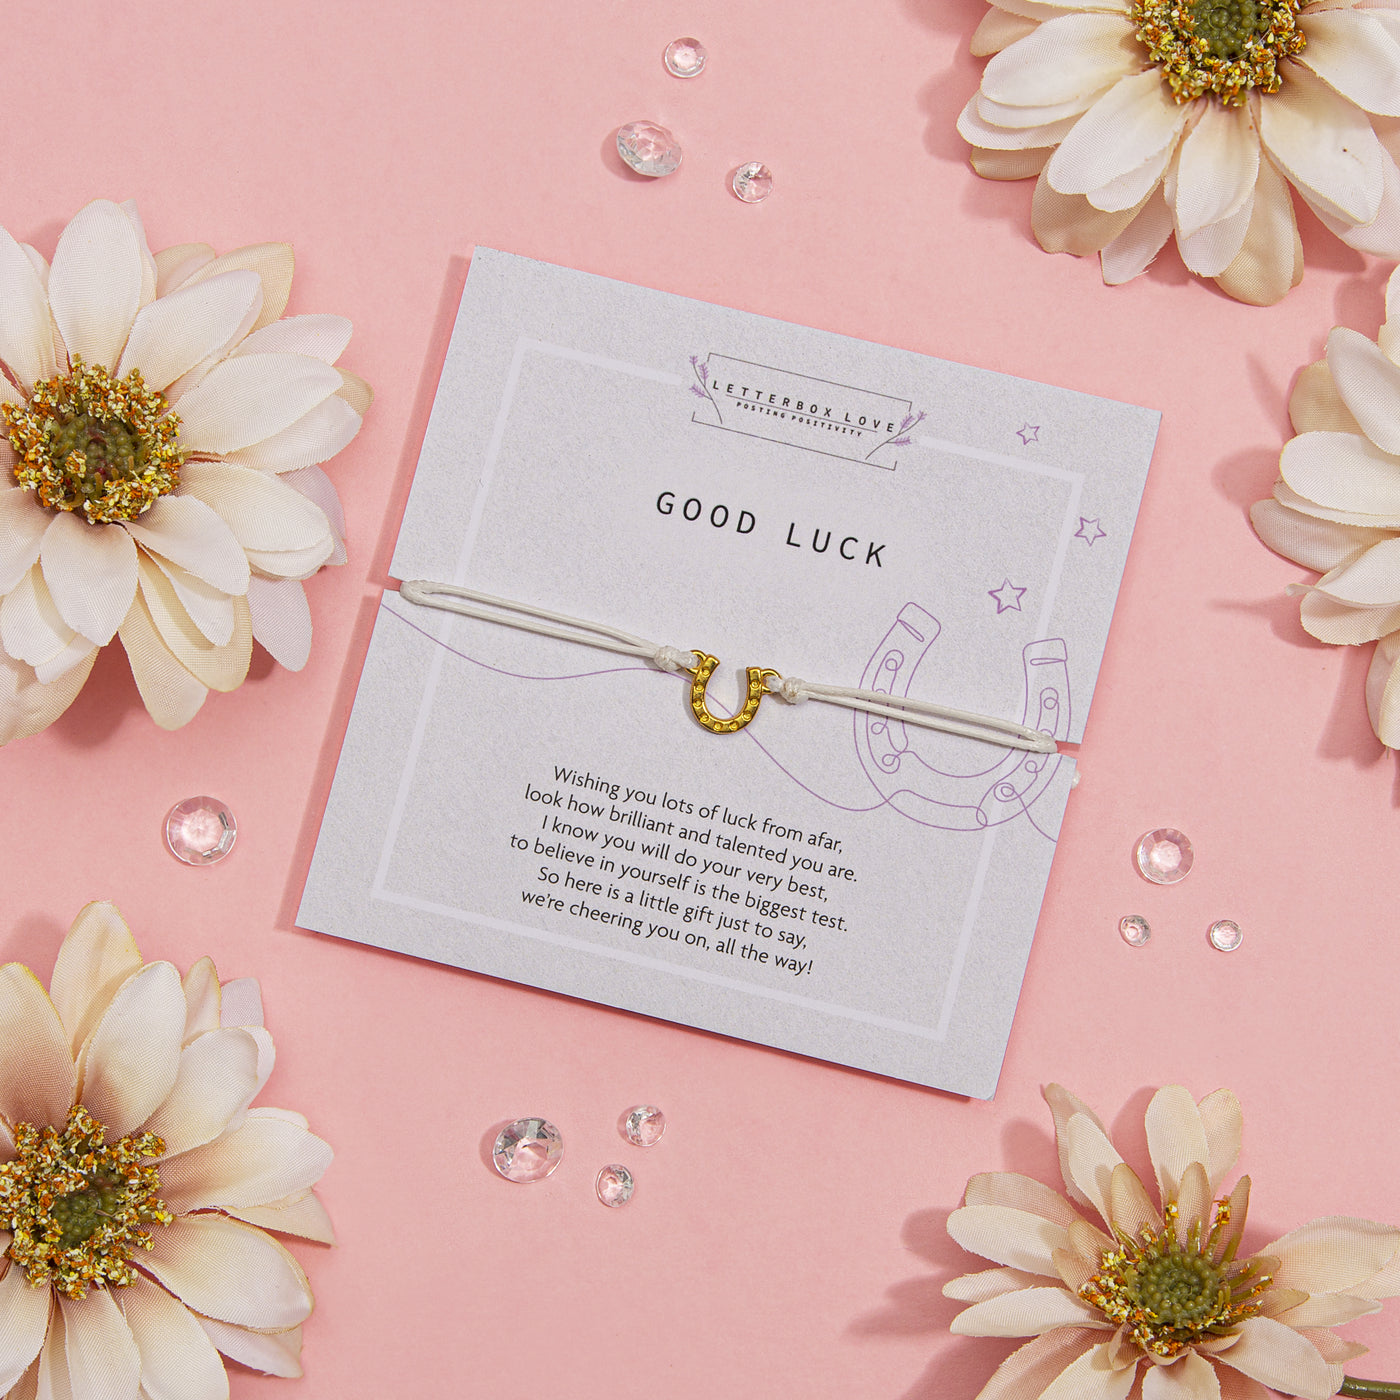 Charming 'GOOD LUCK' card on a soft pink background, adorned with encouraging words and a horseshoe illustration, accompanied by a slender silver bracelet with a golden horseshoe charm.